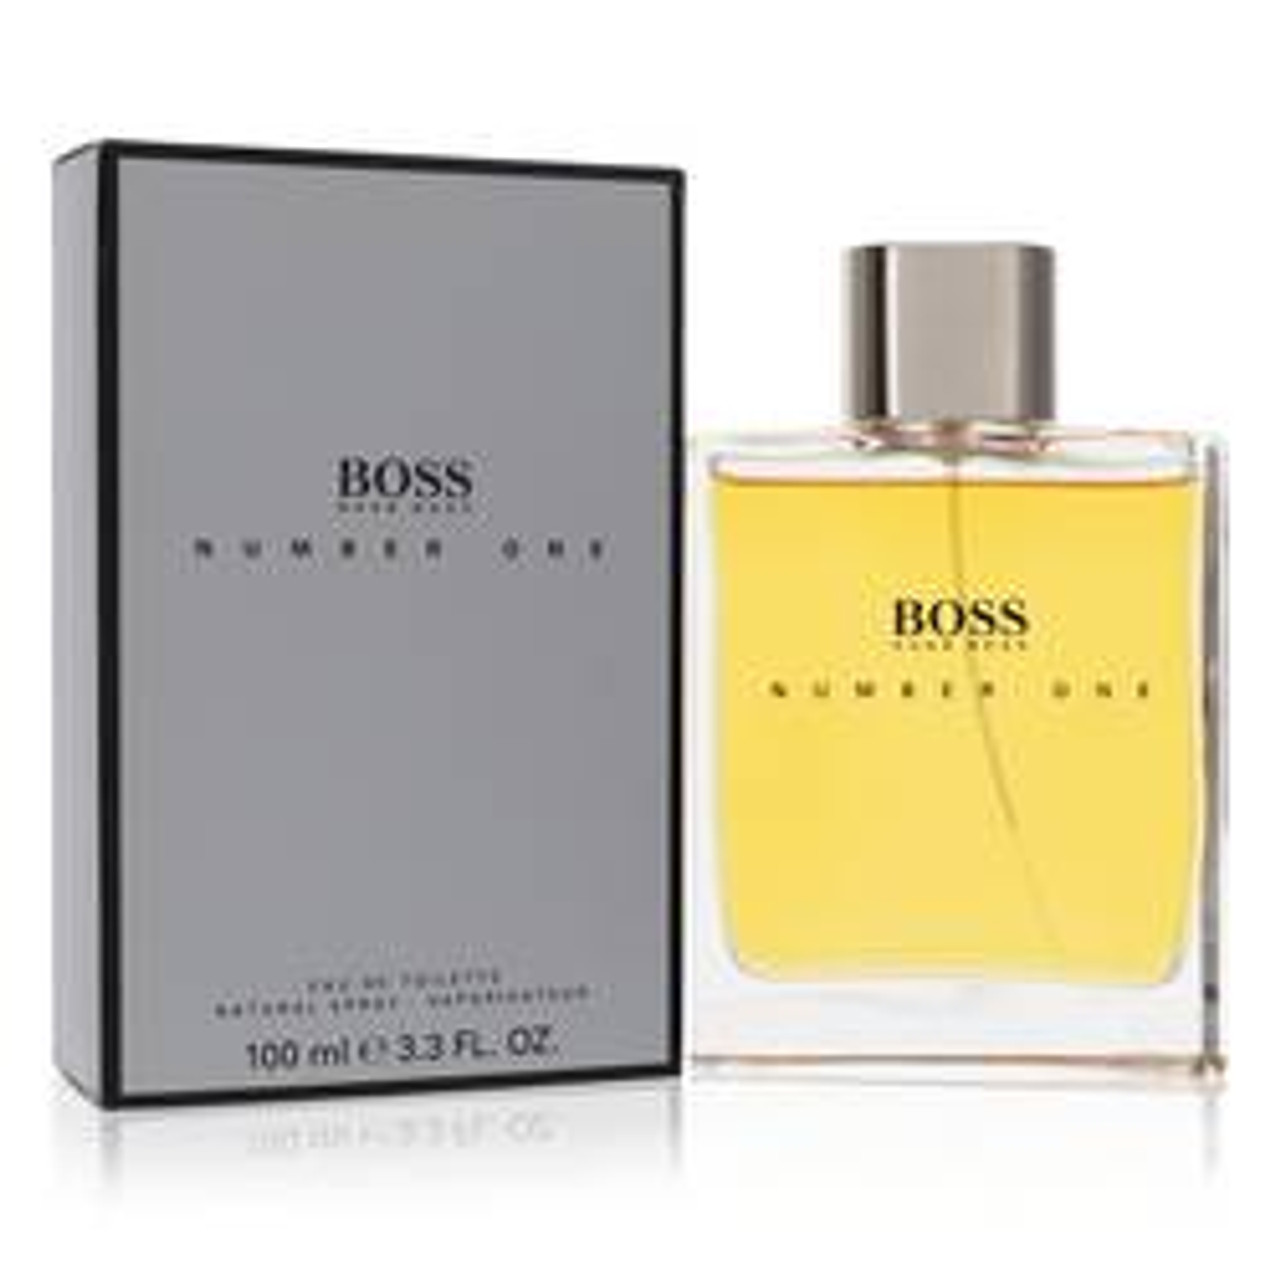 Boss No. 1 Cologne By Hugo Boss Eau De Toilette Spray 3.3 oz for Men - [From 96.00 - Choose pk Qty ] - *Ships from Miami